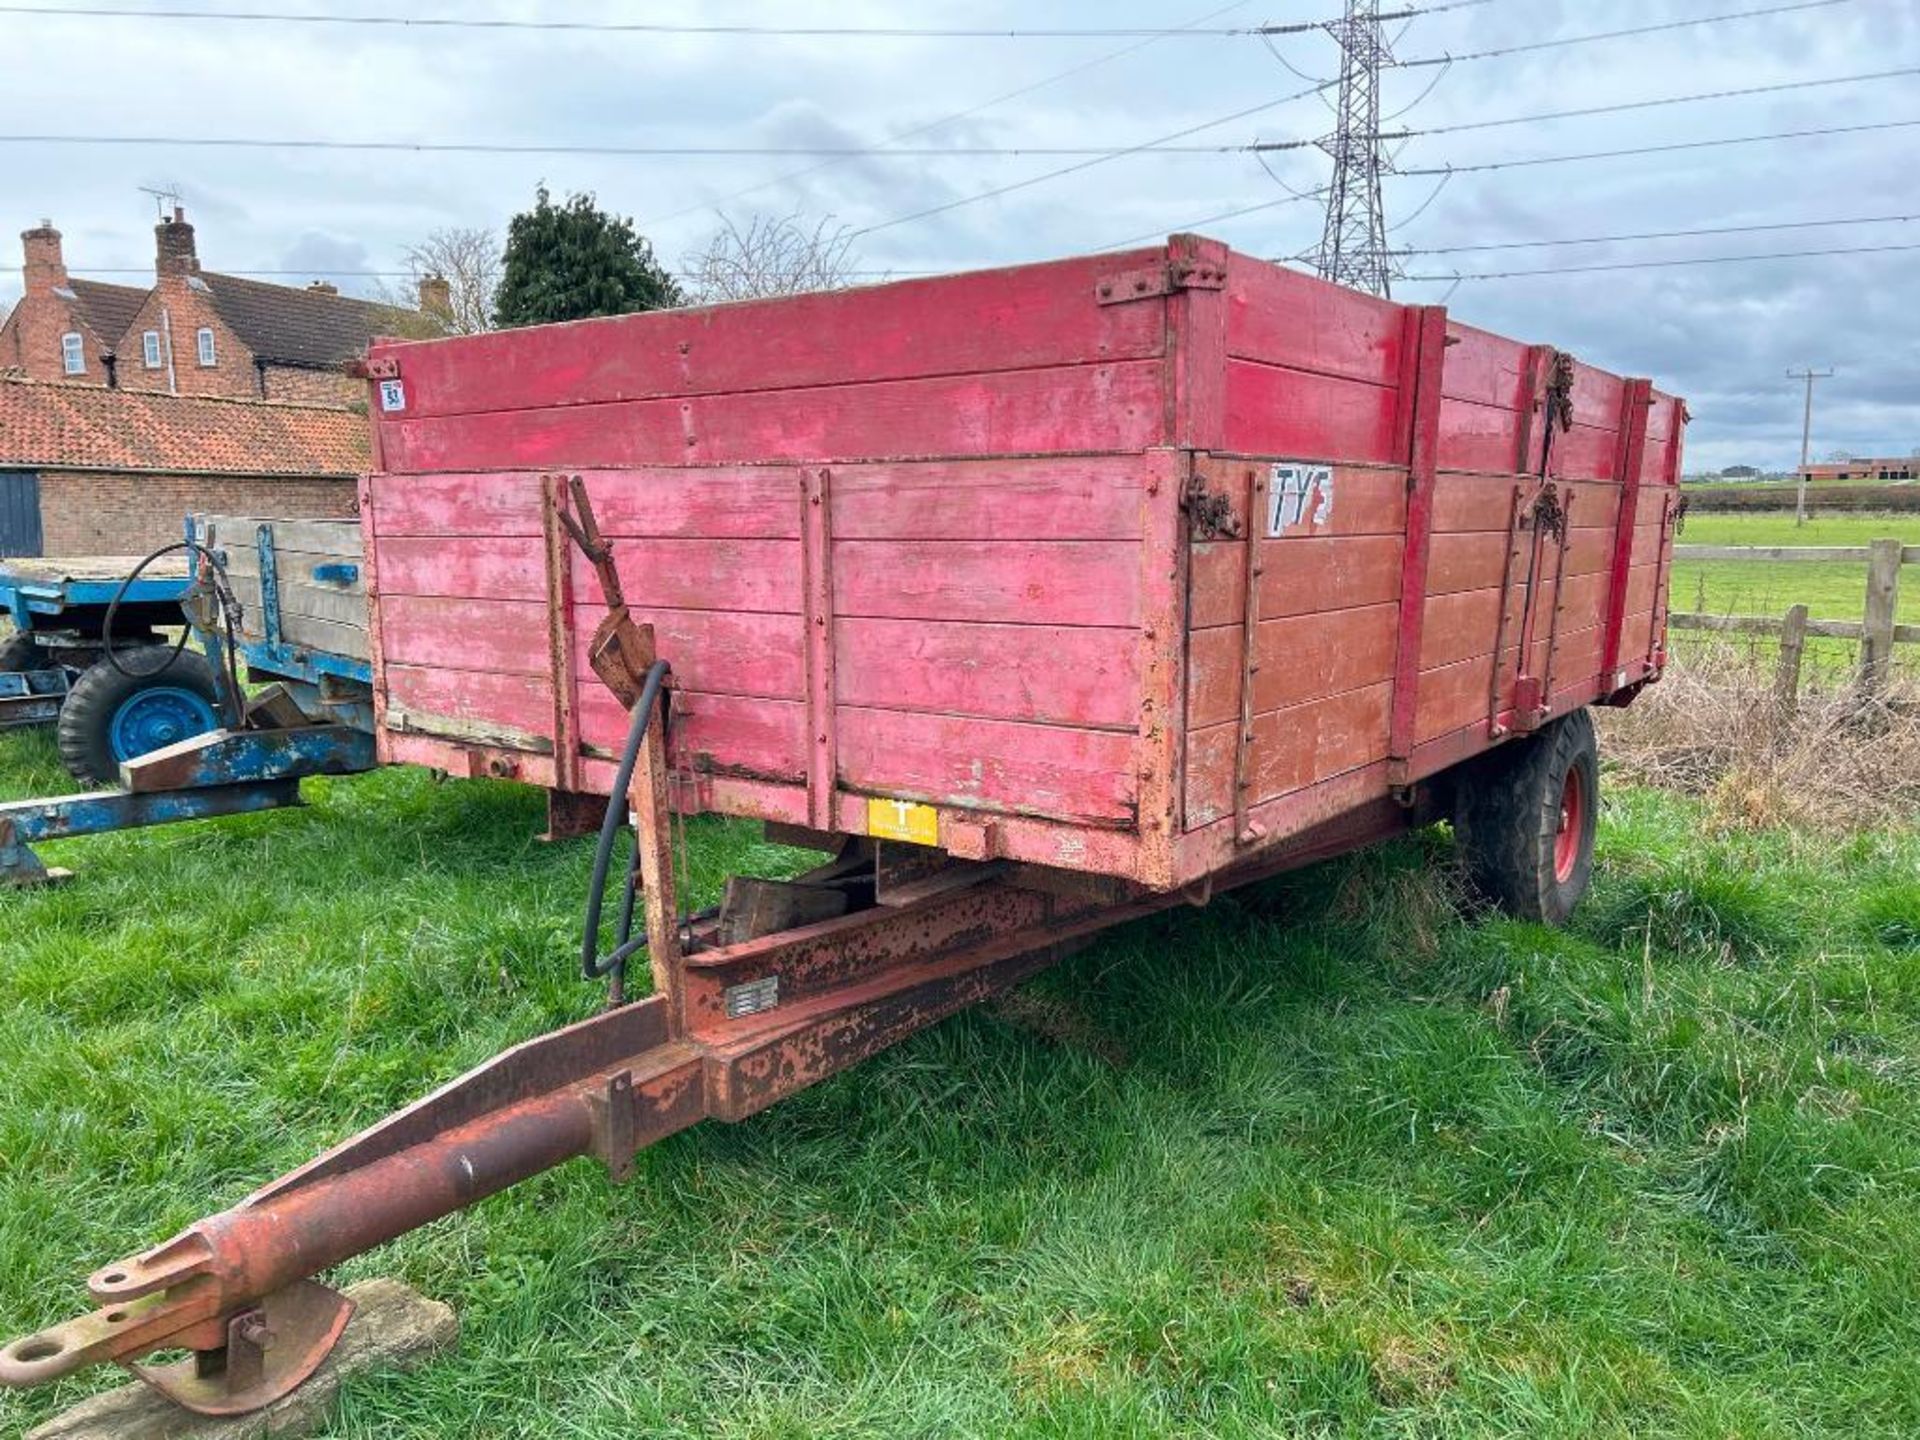 1975 Tye 6T single axle grain trailer with extensions. On the farm from new. Serial No: 6782 - Image 2 of 12